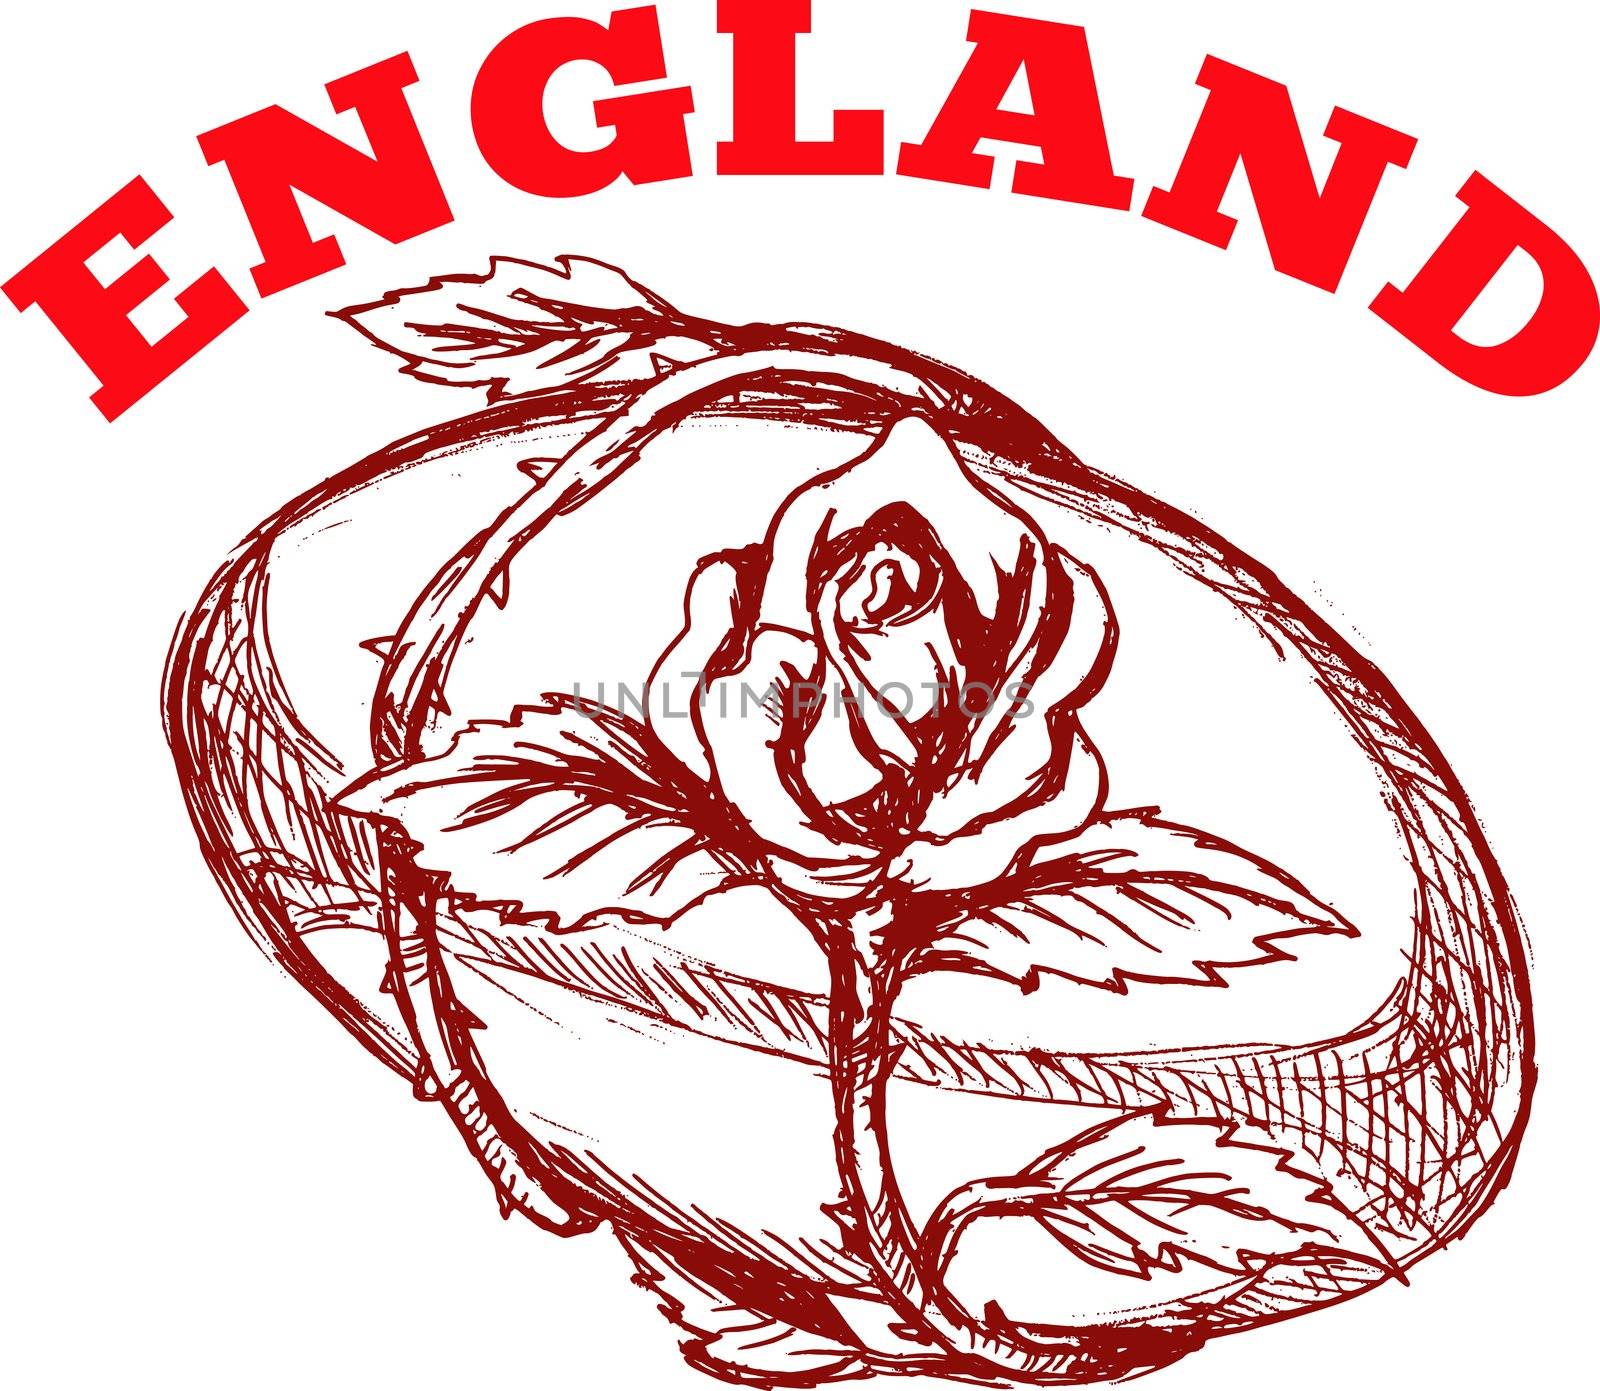 hand sketched drawing illustration of rugby ball with rose flower vine entwined on isolated background with words "England"